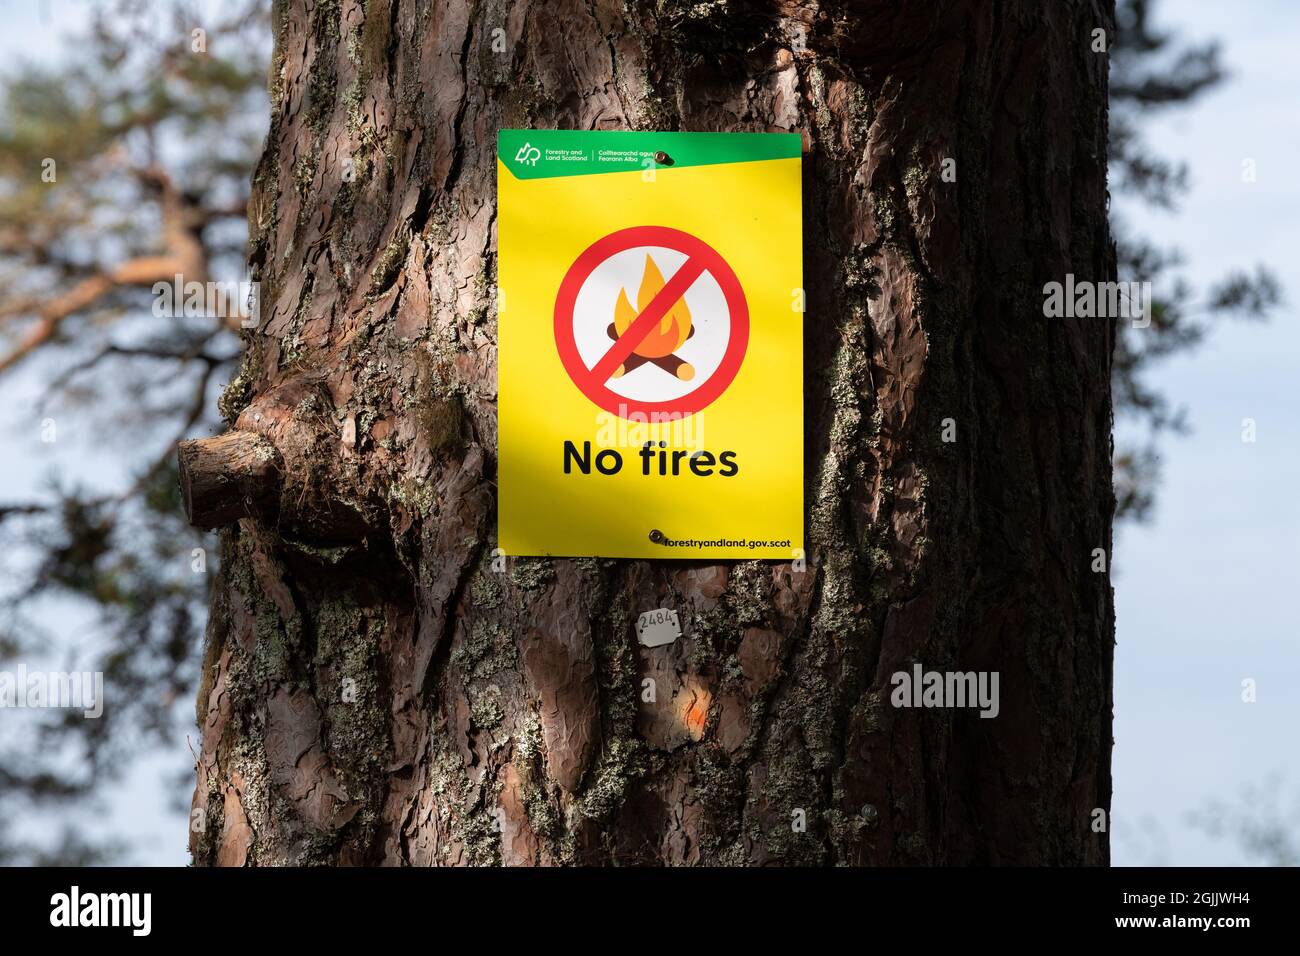 No fires sign attached to tree, Loch Rannoch, Perth and Kinross, Scotland, UK Stock Photo